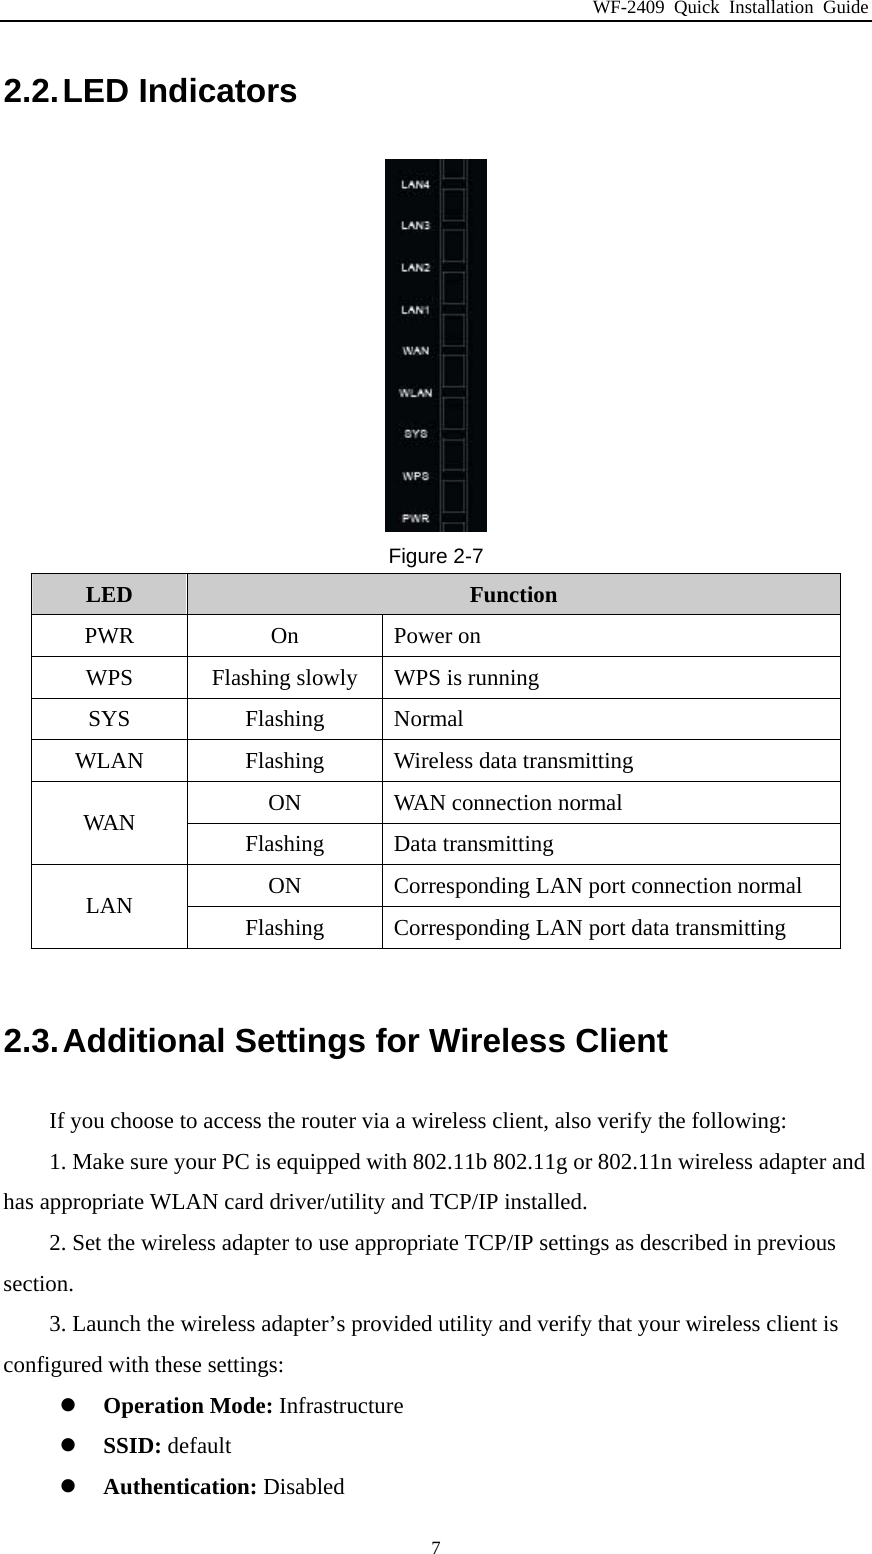 WF-2409 Quick Installation Guide  72.2. LED  Indicators  Figure 2-7 LED  Function PWR On Power on WPS  Flashing slowly  WPS is running SYS Flashing Normal WLAN  Flashing  Wireless data transmitting ON  WAN connection normal WAN  Flashing Data transmitting ON  Corresponding LAN port connection normal LAN  Flashing  Corresponding LAN port data transmitting  2.3. Additional Settings for Wireless Client If you choose to access the router via a wireless client, also verify the following: 1. Make sure your PC is equipped with 802.11b 802.11g or 802.11n wireless adapter and has appropriate WLAN card driver/utility and TCP/IP installed. 2. Set the wireless adapter to use appropriate TCP/IP settings as described in previous section. 3. Launch the wireless adapter’s provided utility and verify that your wireless client is configured with these settings:  Operation Mode: Infrastructure  SSID: default  Authentication: Disabled 